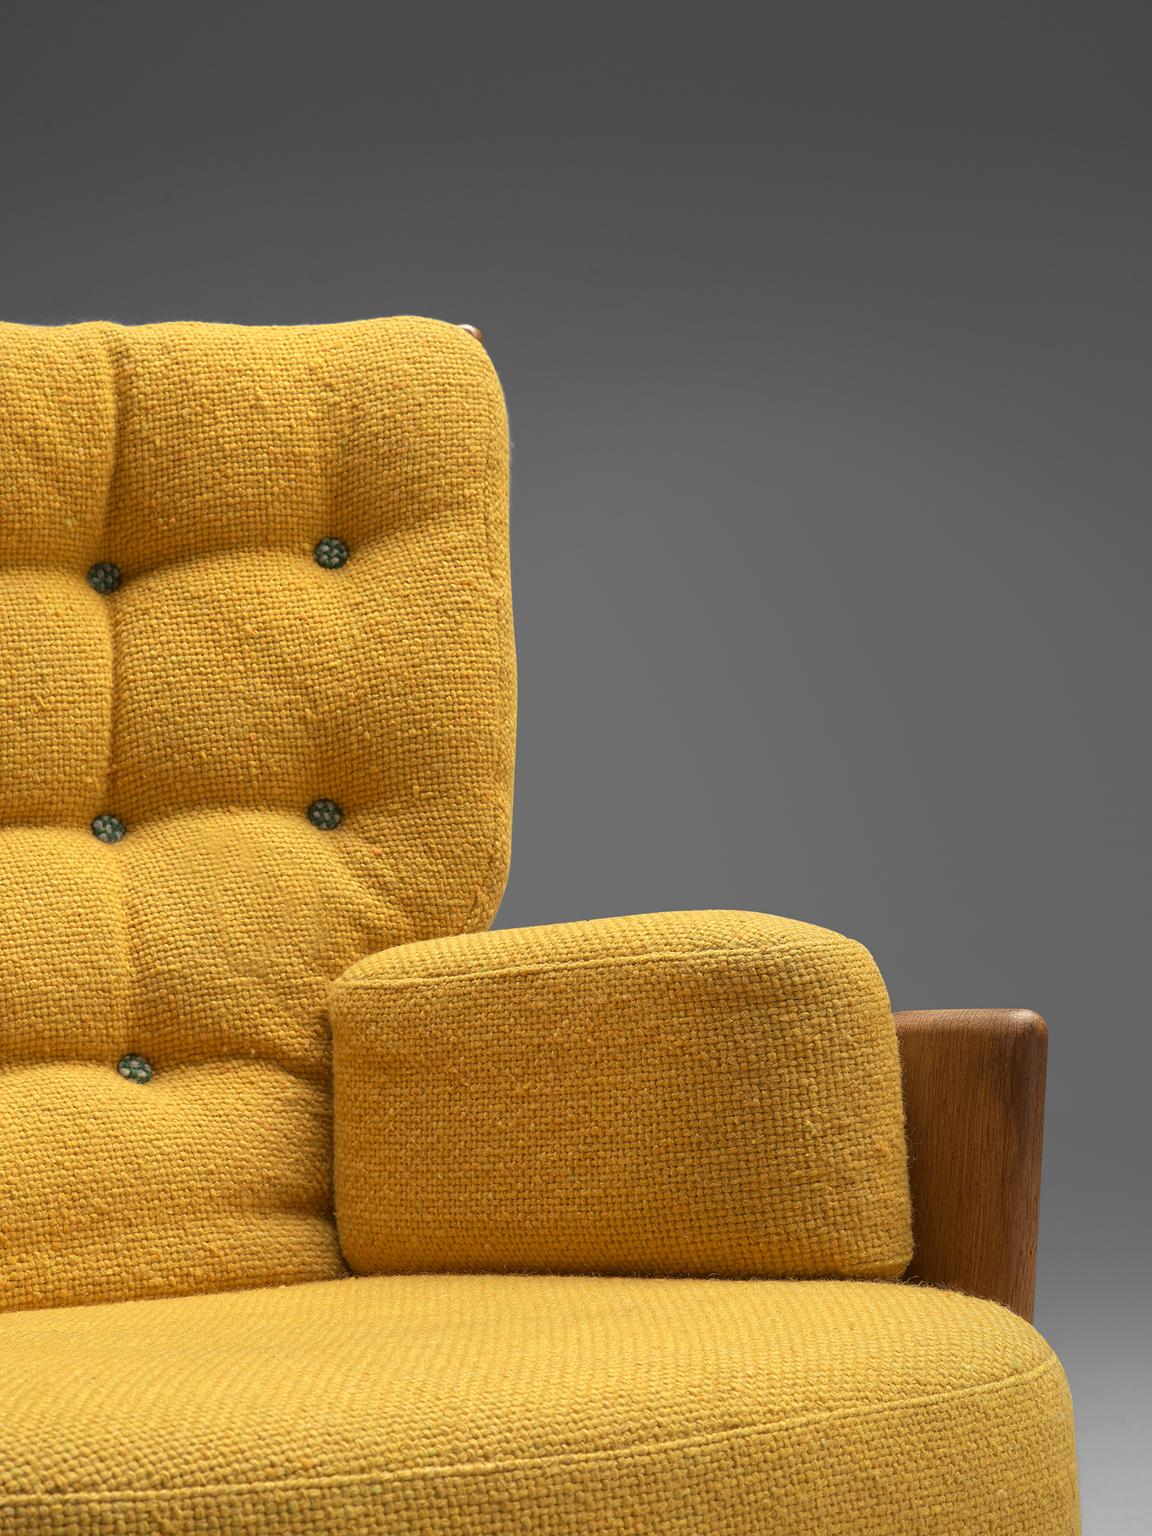 Mid-20th Century Guillerme & Chambron Large High Back Chair in Sunflower Yellow Upholstery